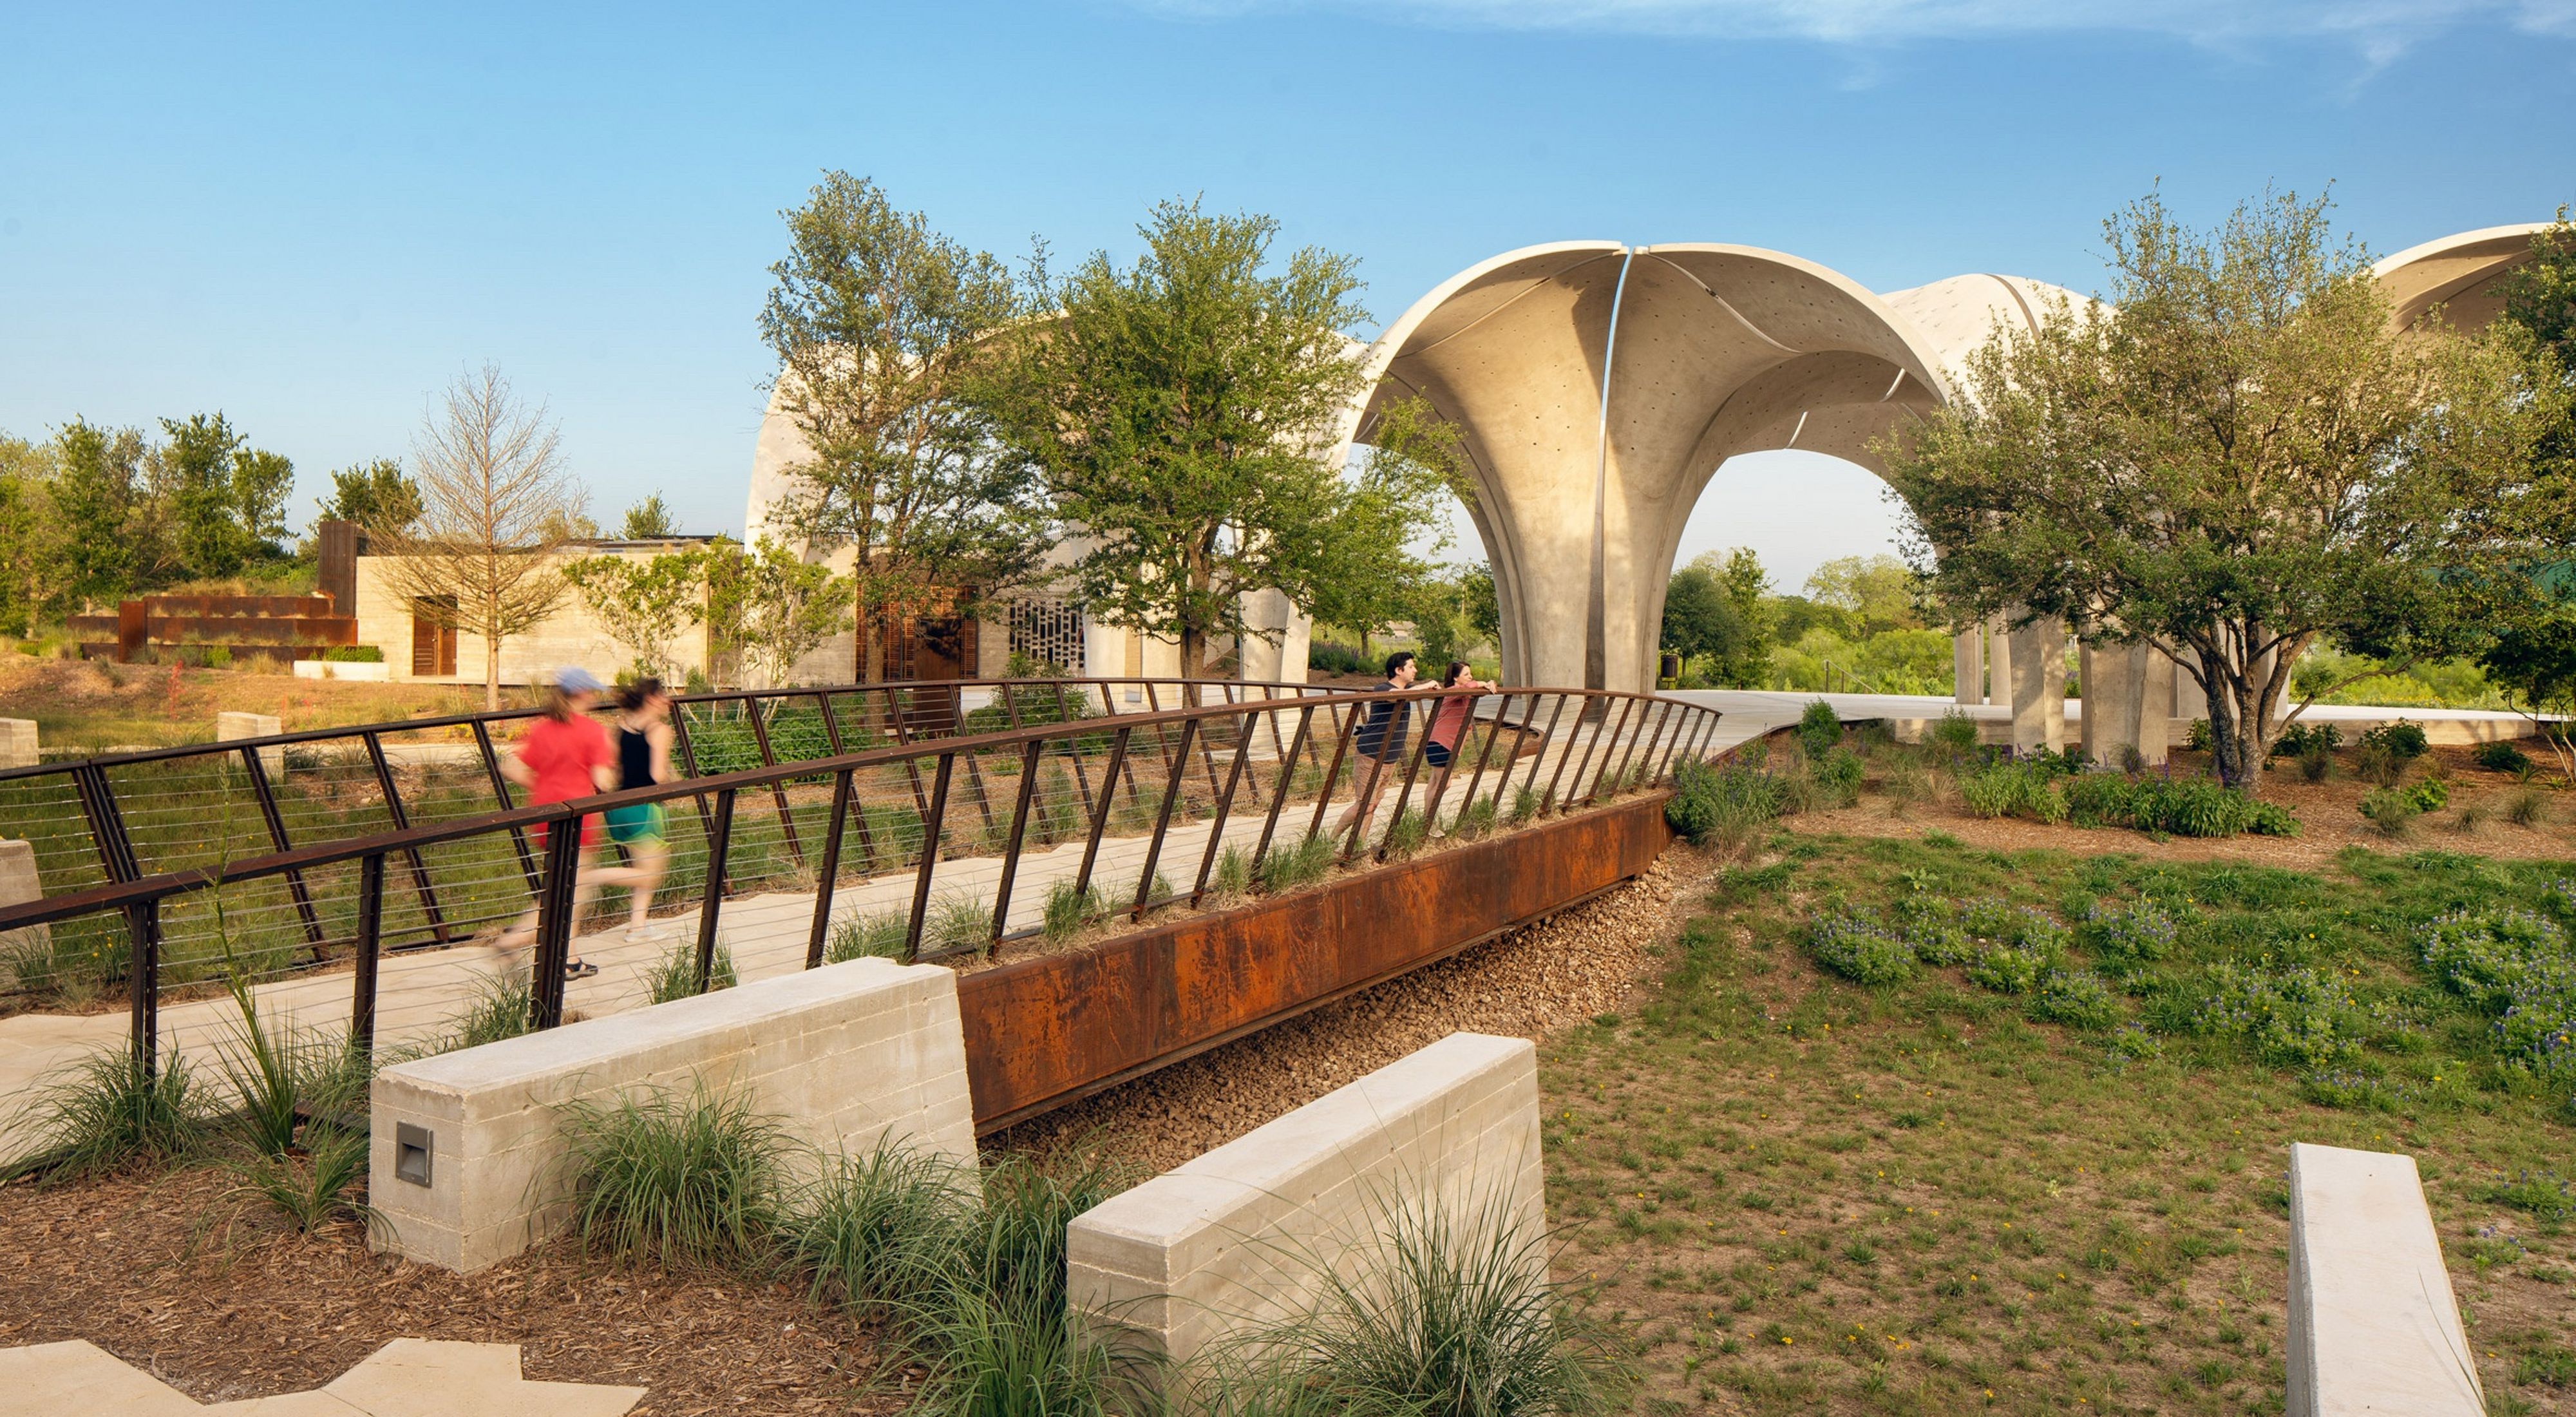 Four people explore a green park with a bridge and a limestone structure in the center.